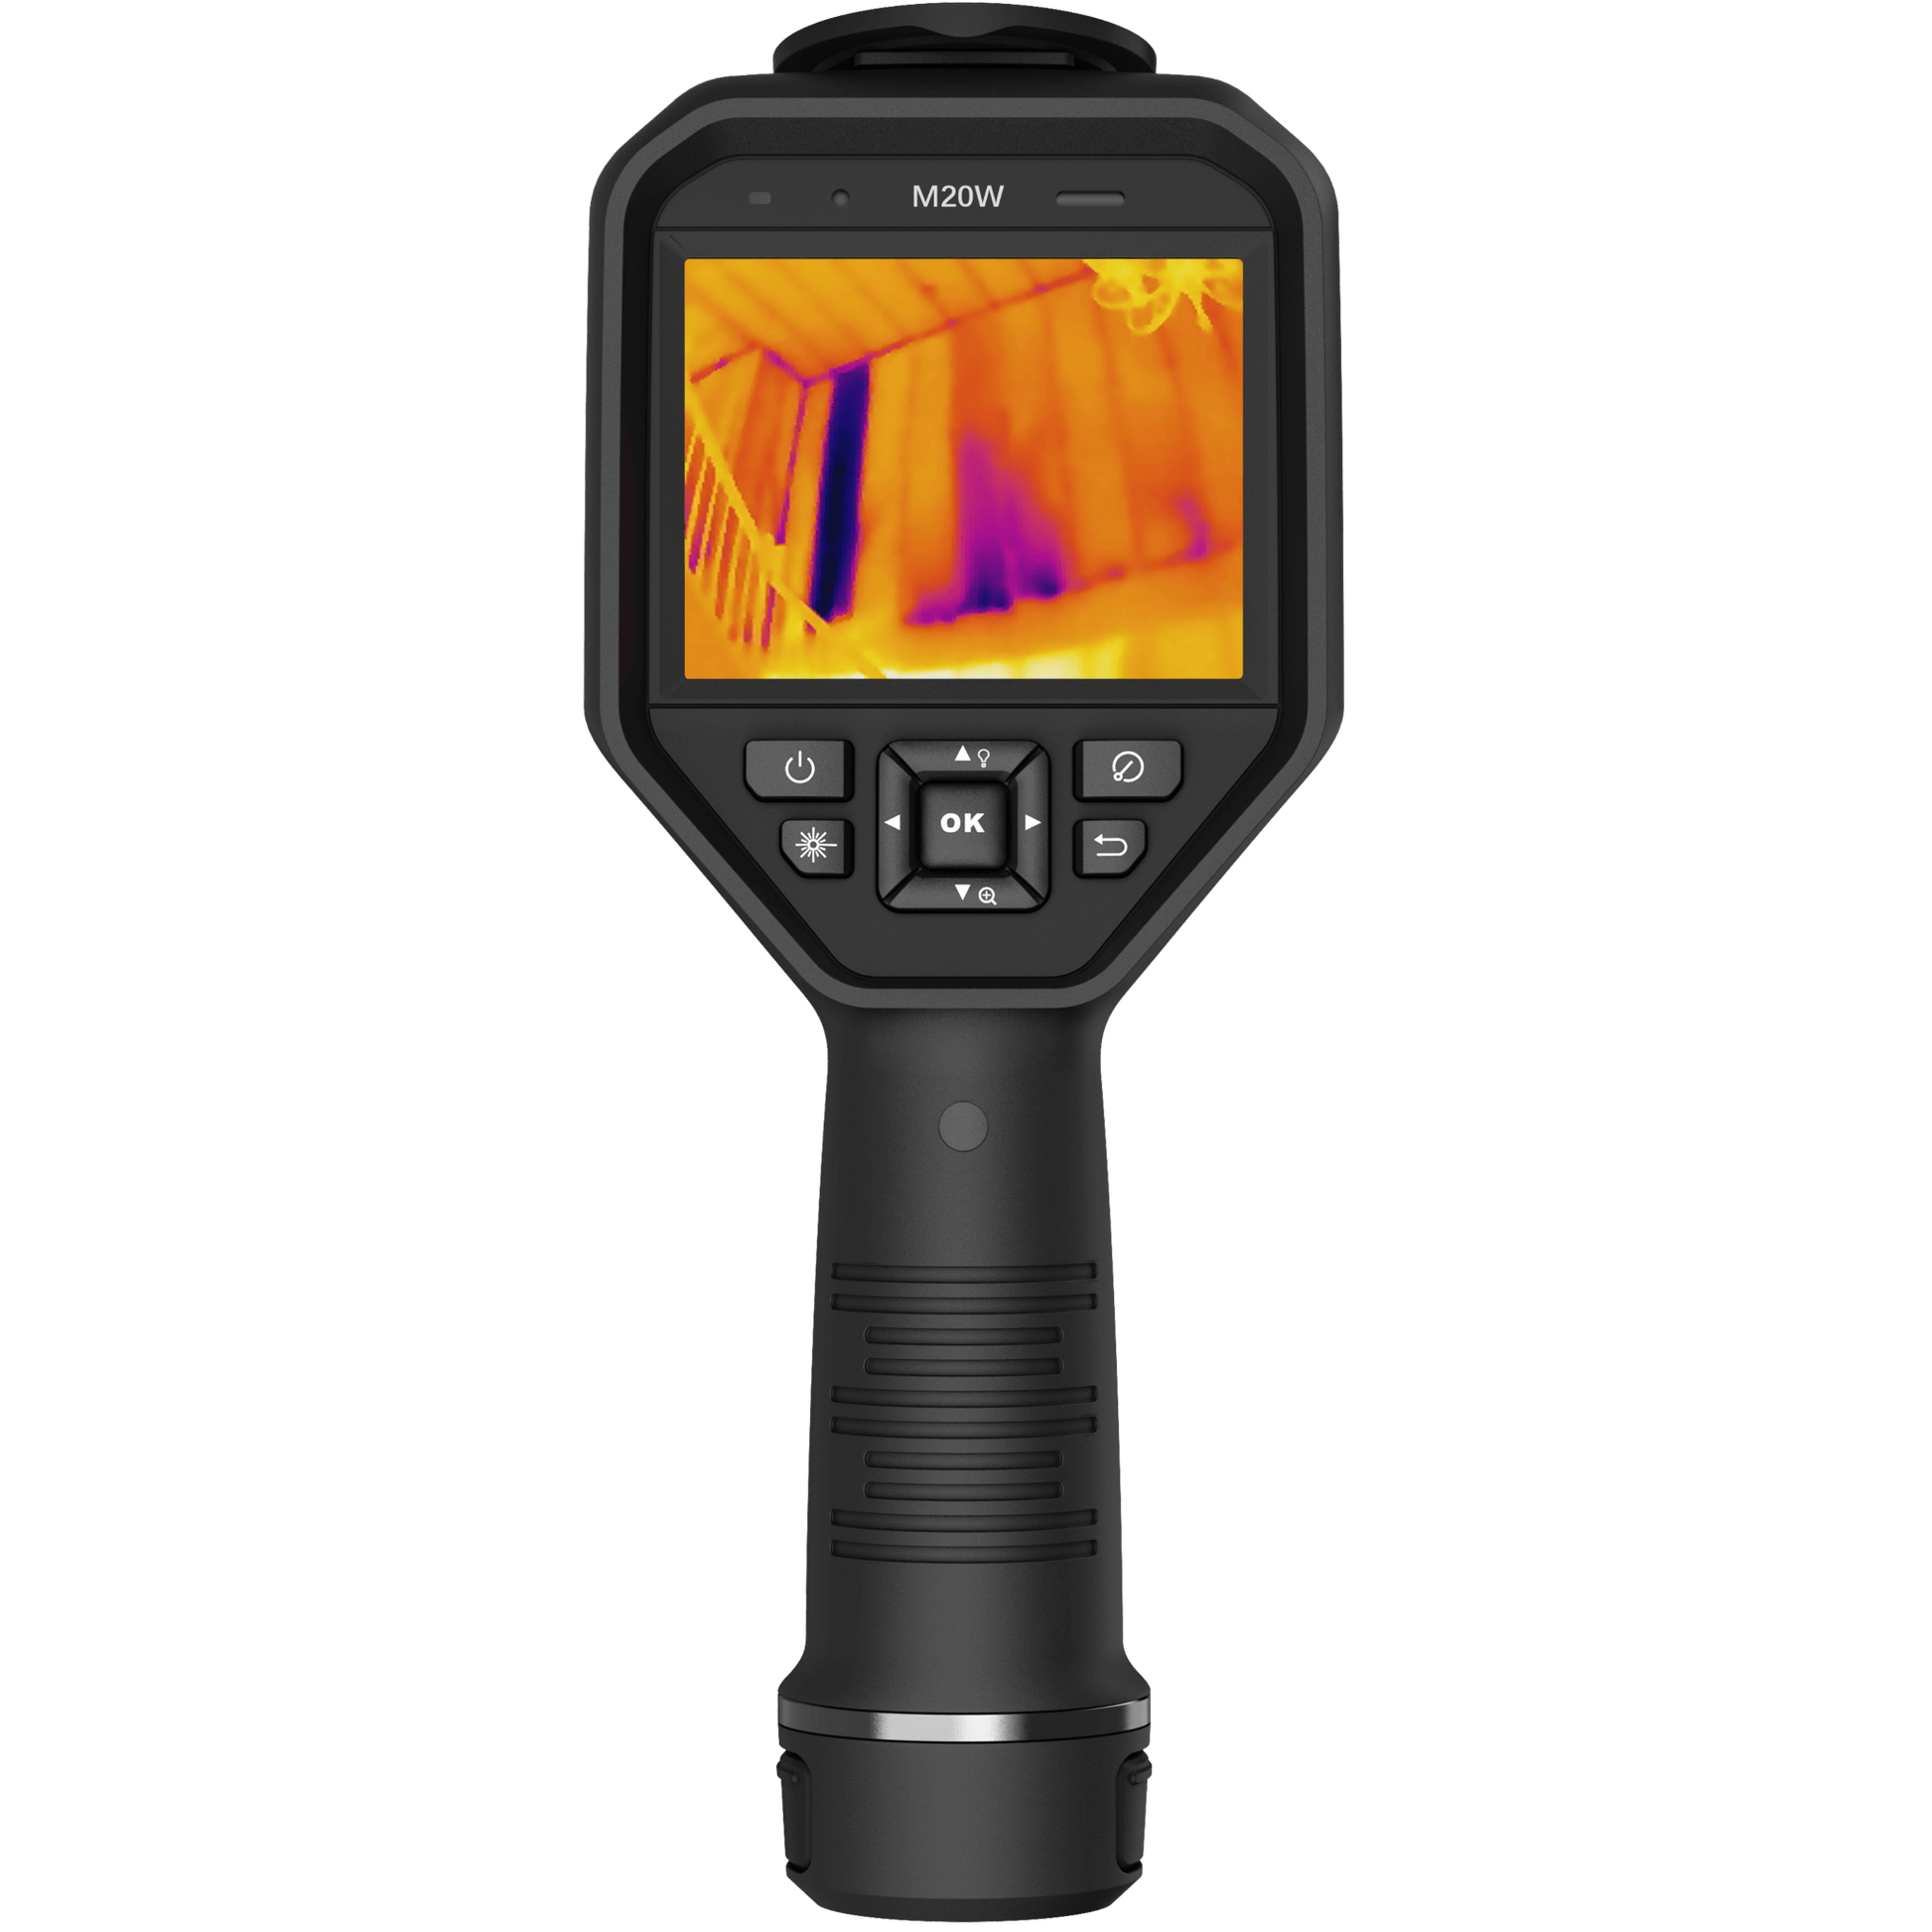 HikMicro M20W Handheld Thermography Camera on a transparent background - Alternative Screen View